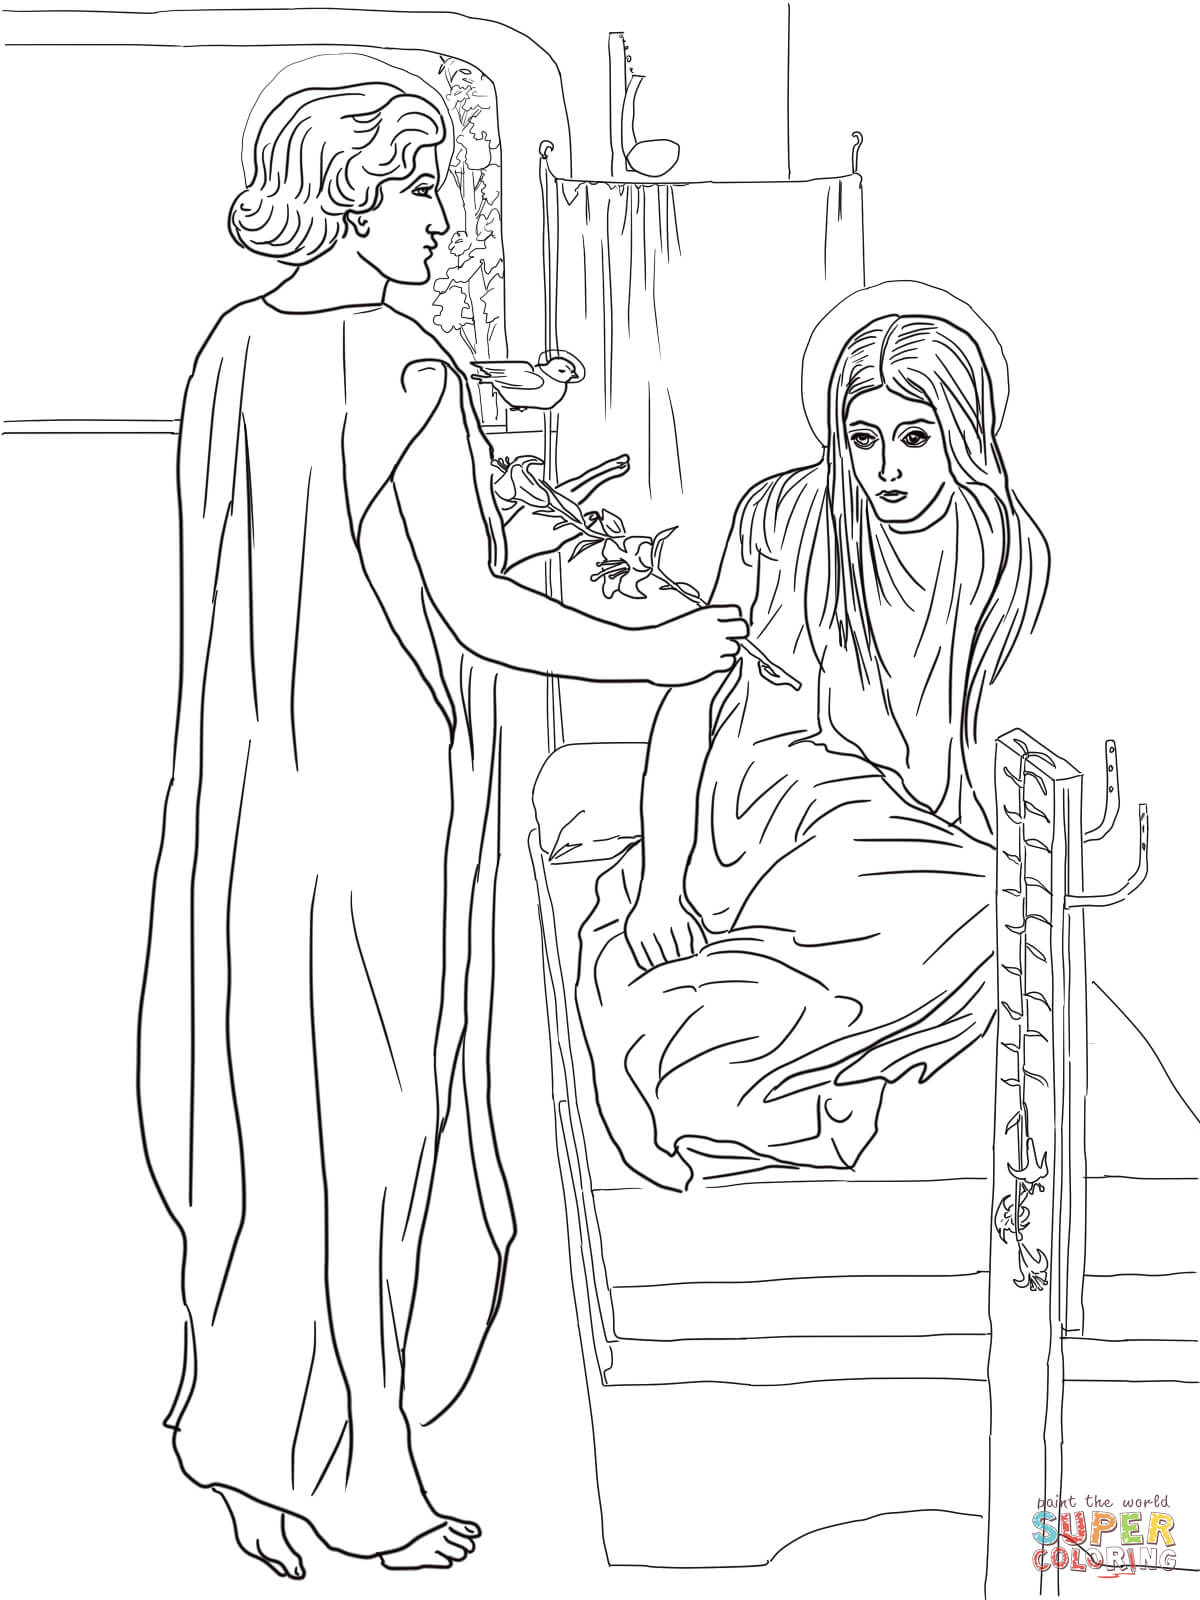 Angel Gabriel Visits Mary coloring page | Free Printable Coloring ...